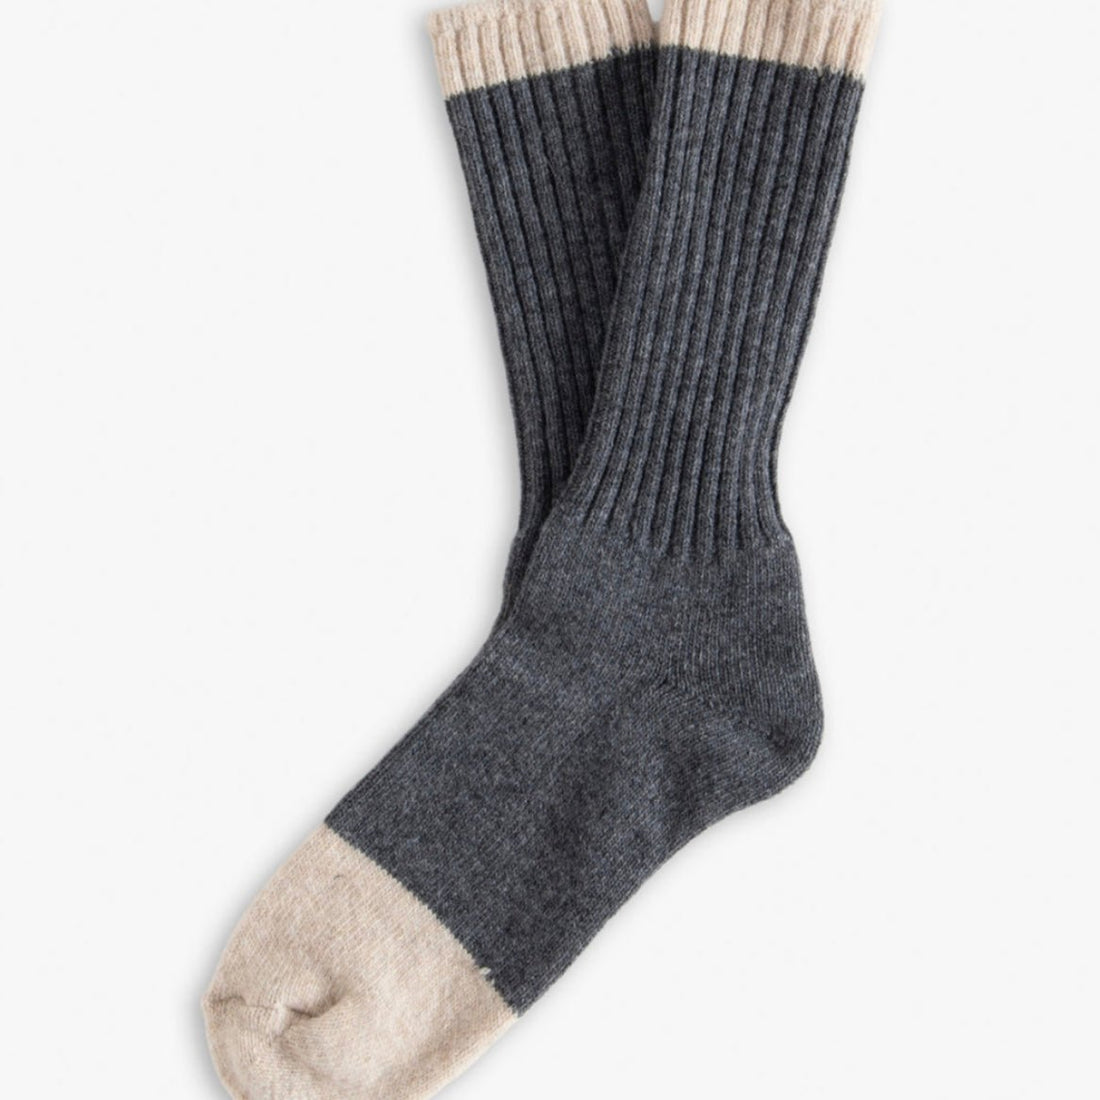 Thunders Love Socks - Wool Collection, Grey - The Flower Crate